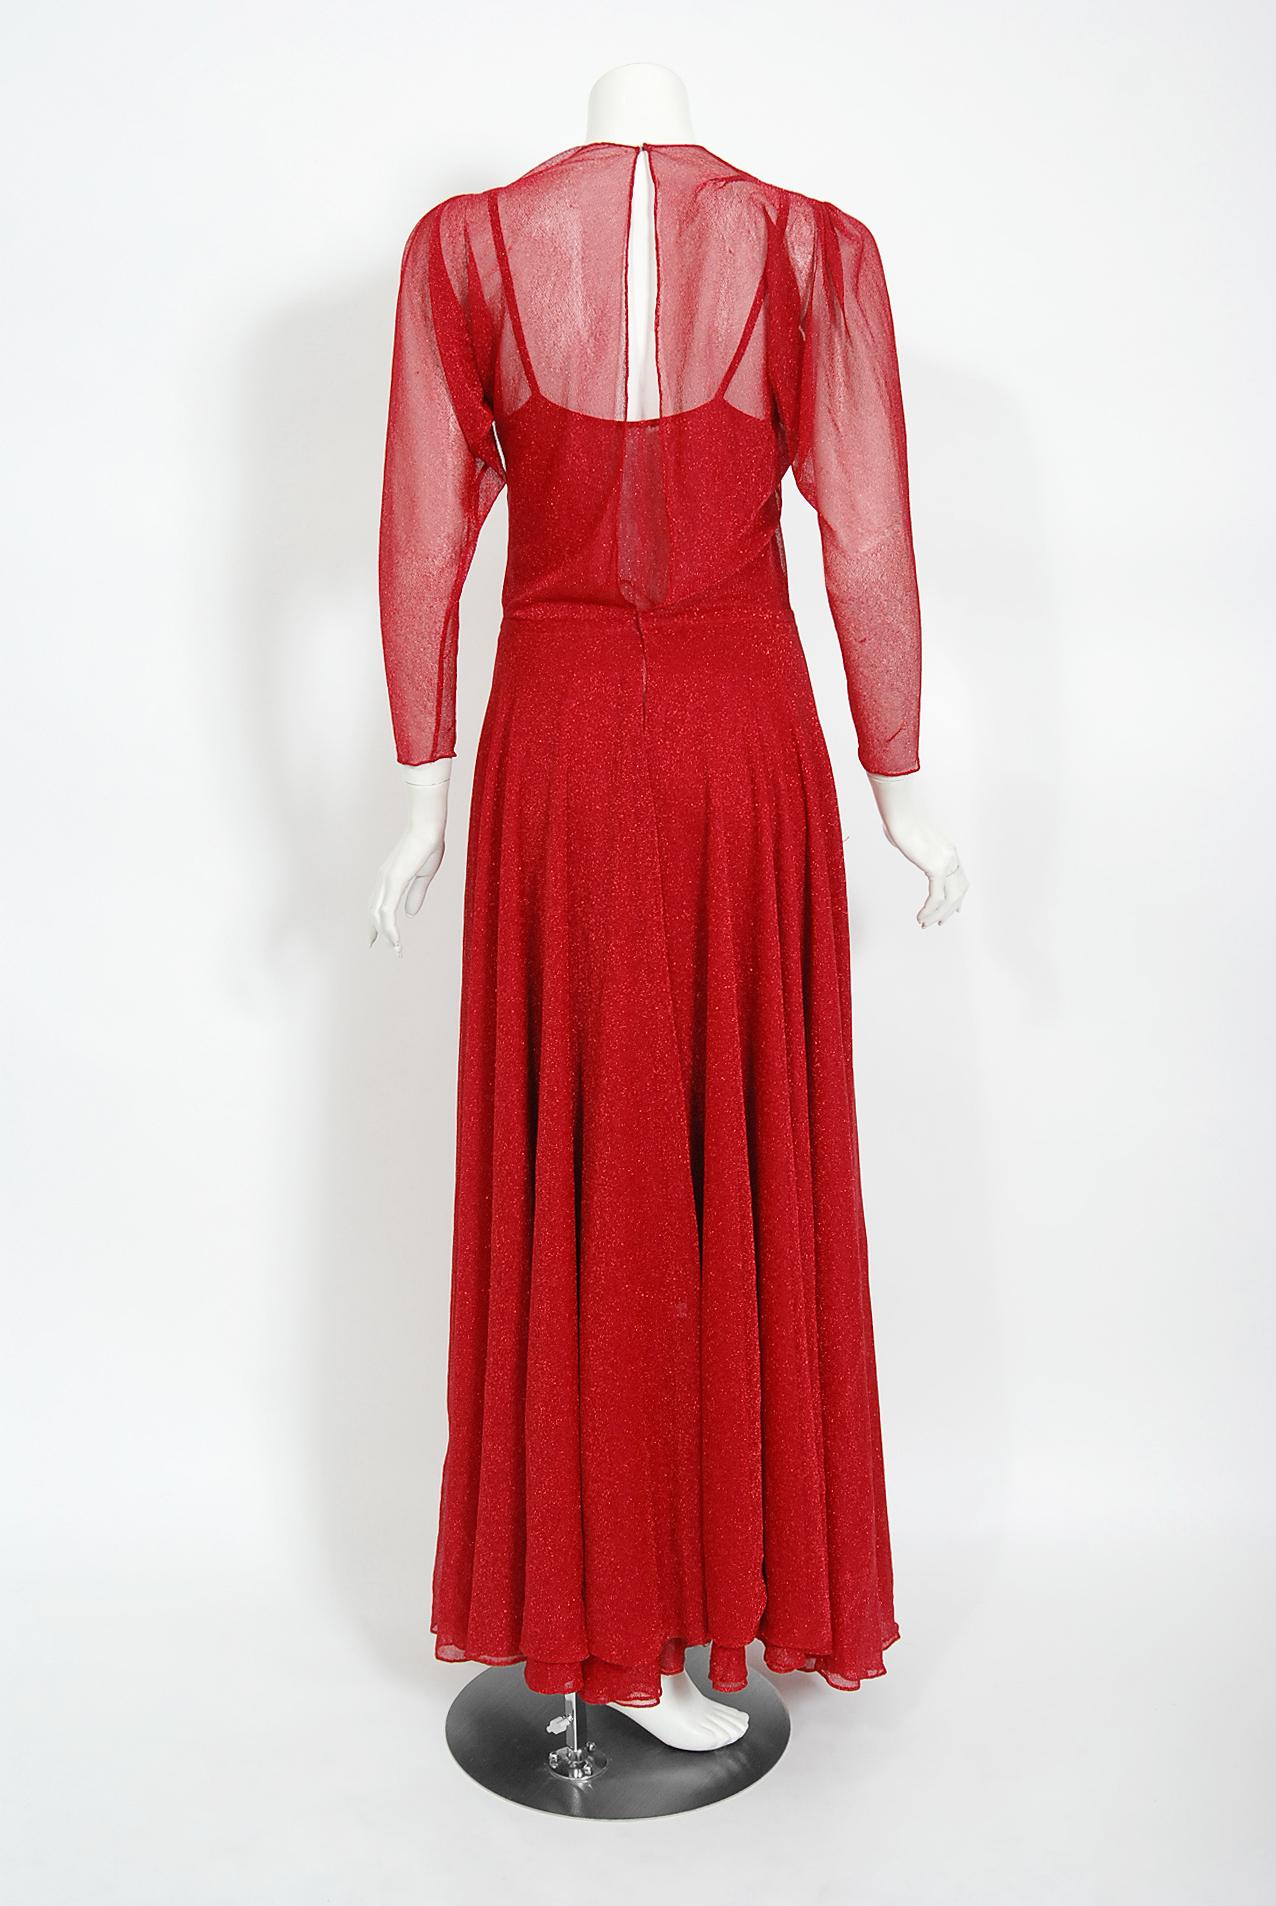 Vintage 1970's Halston Couture Red Metallic Sheer Knit Long-Sleeve Dress Gown For Sale 3